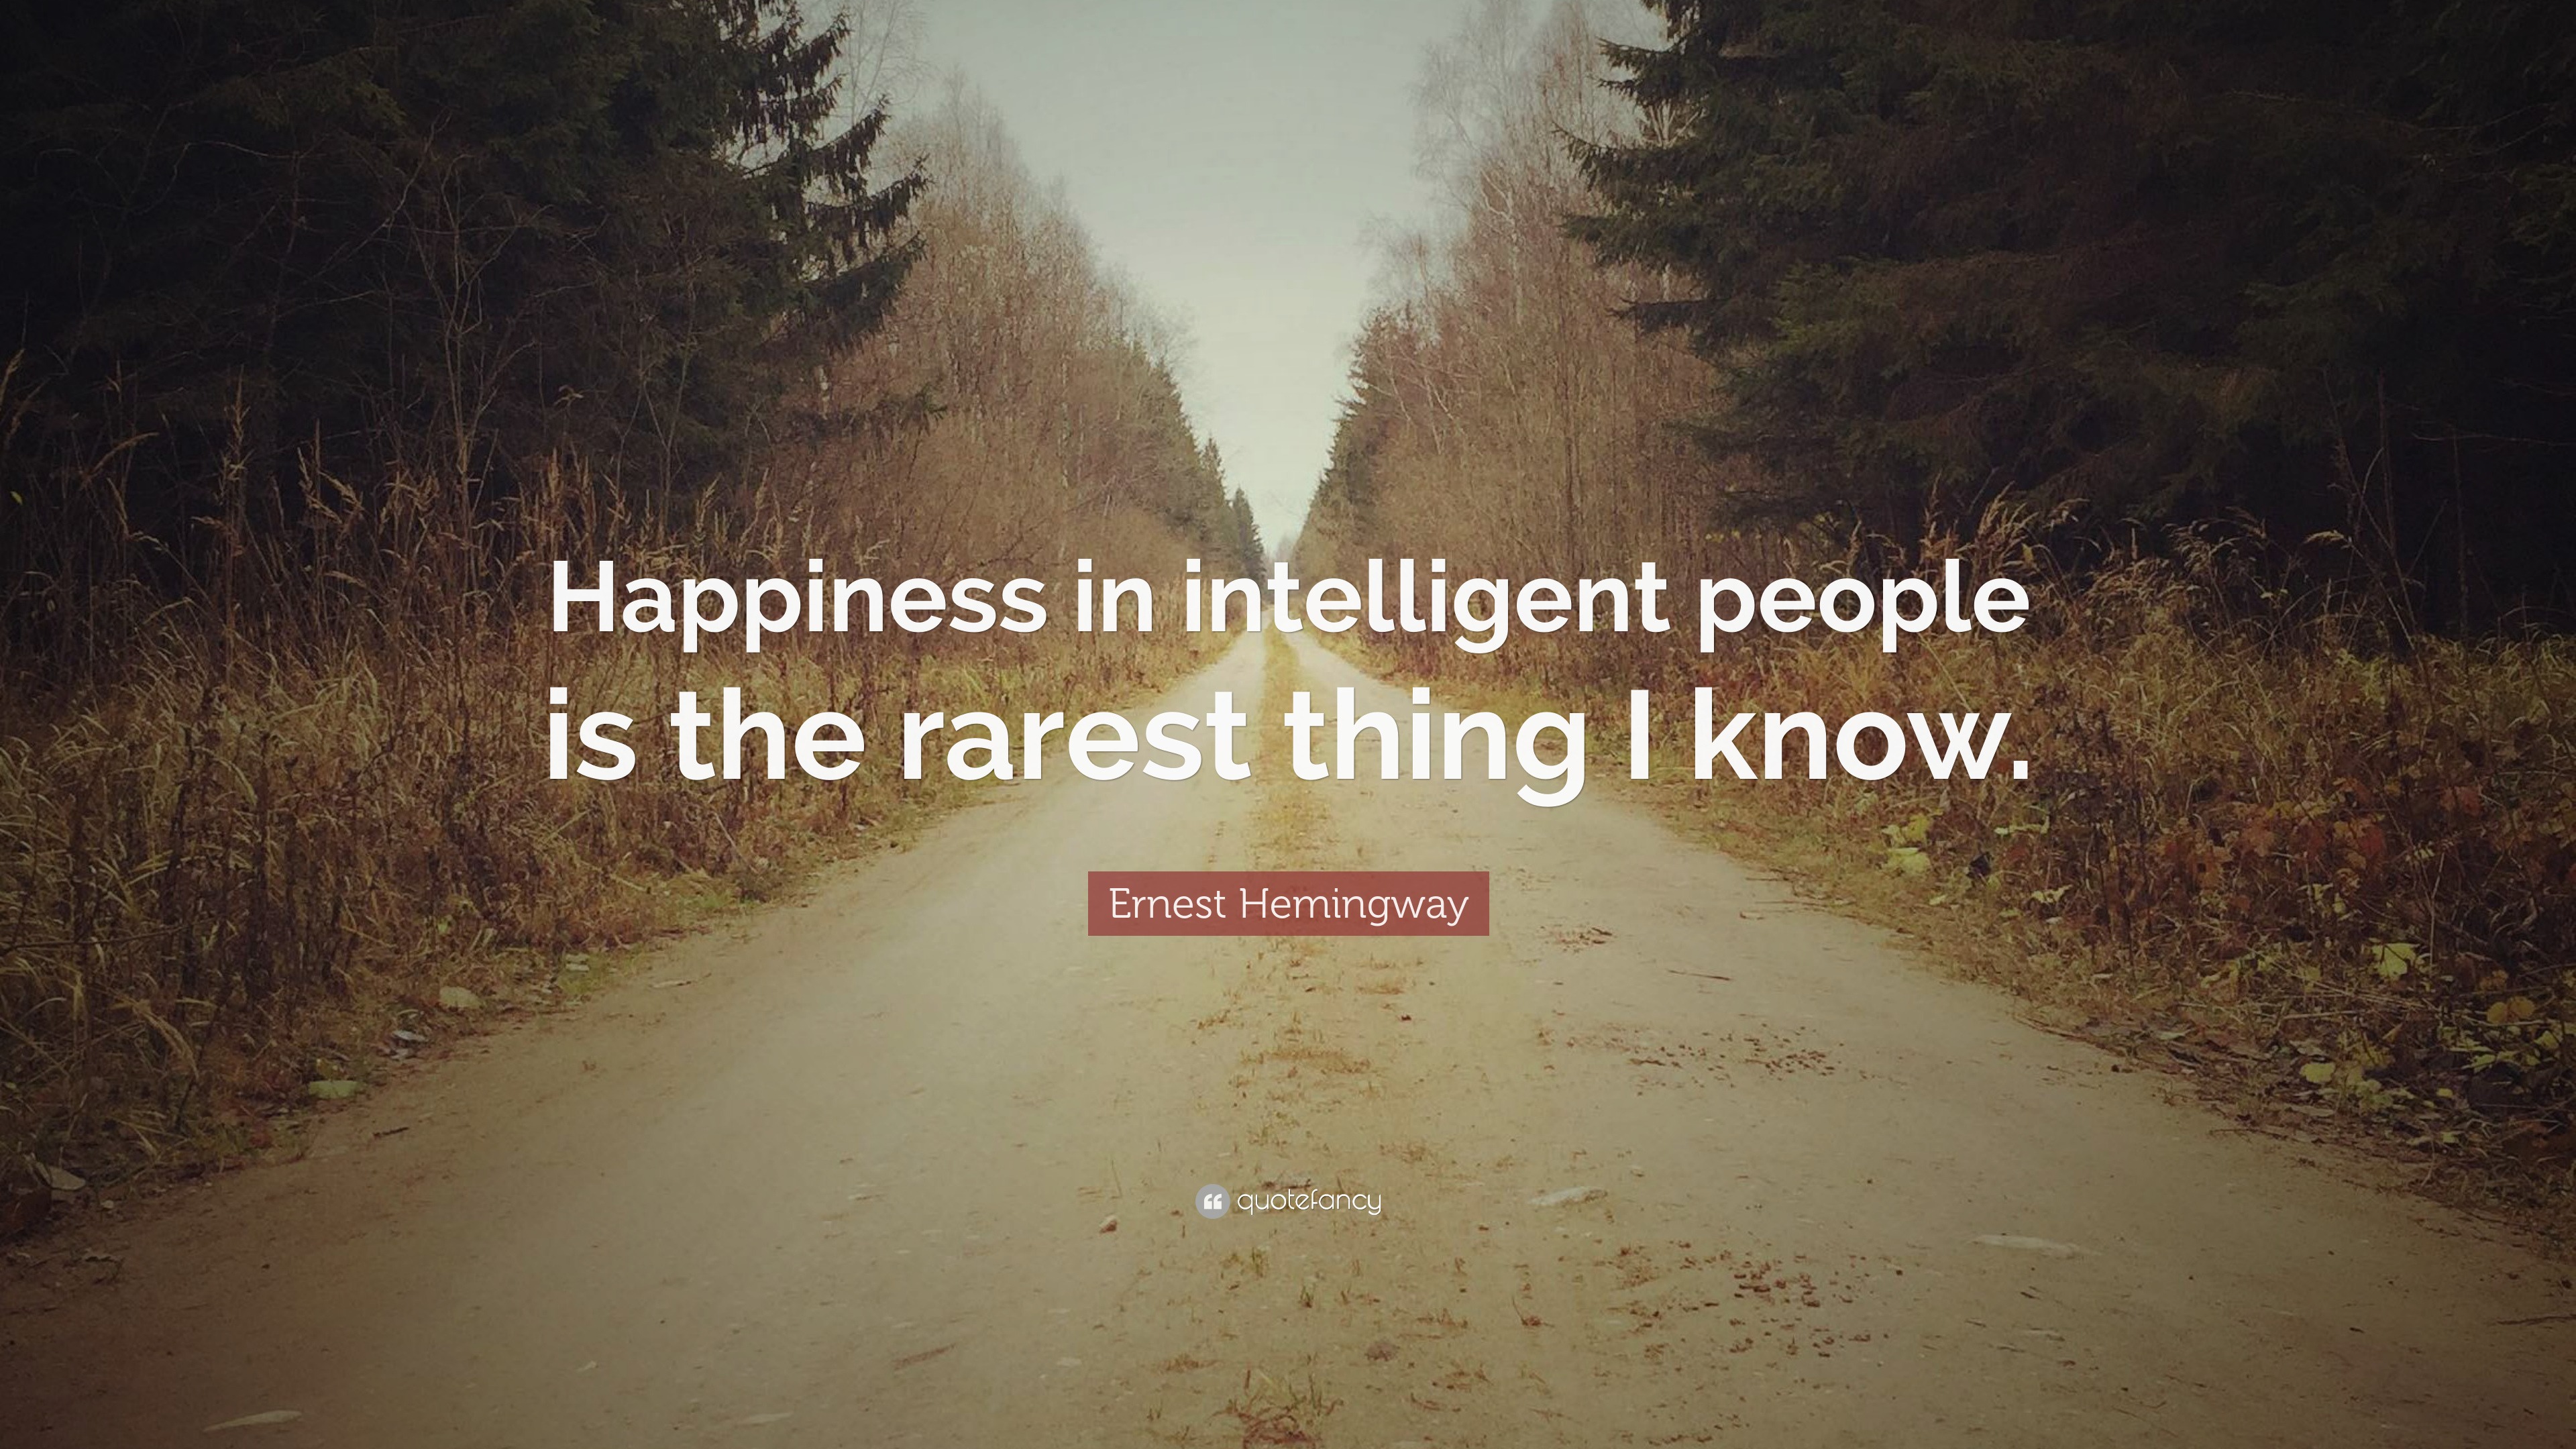 Ernest Hemingway Quote: “Happiness in intelligent people is the rarest